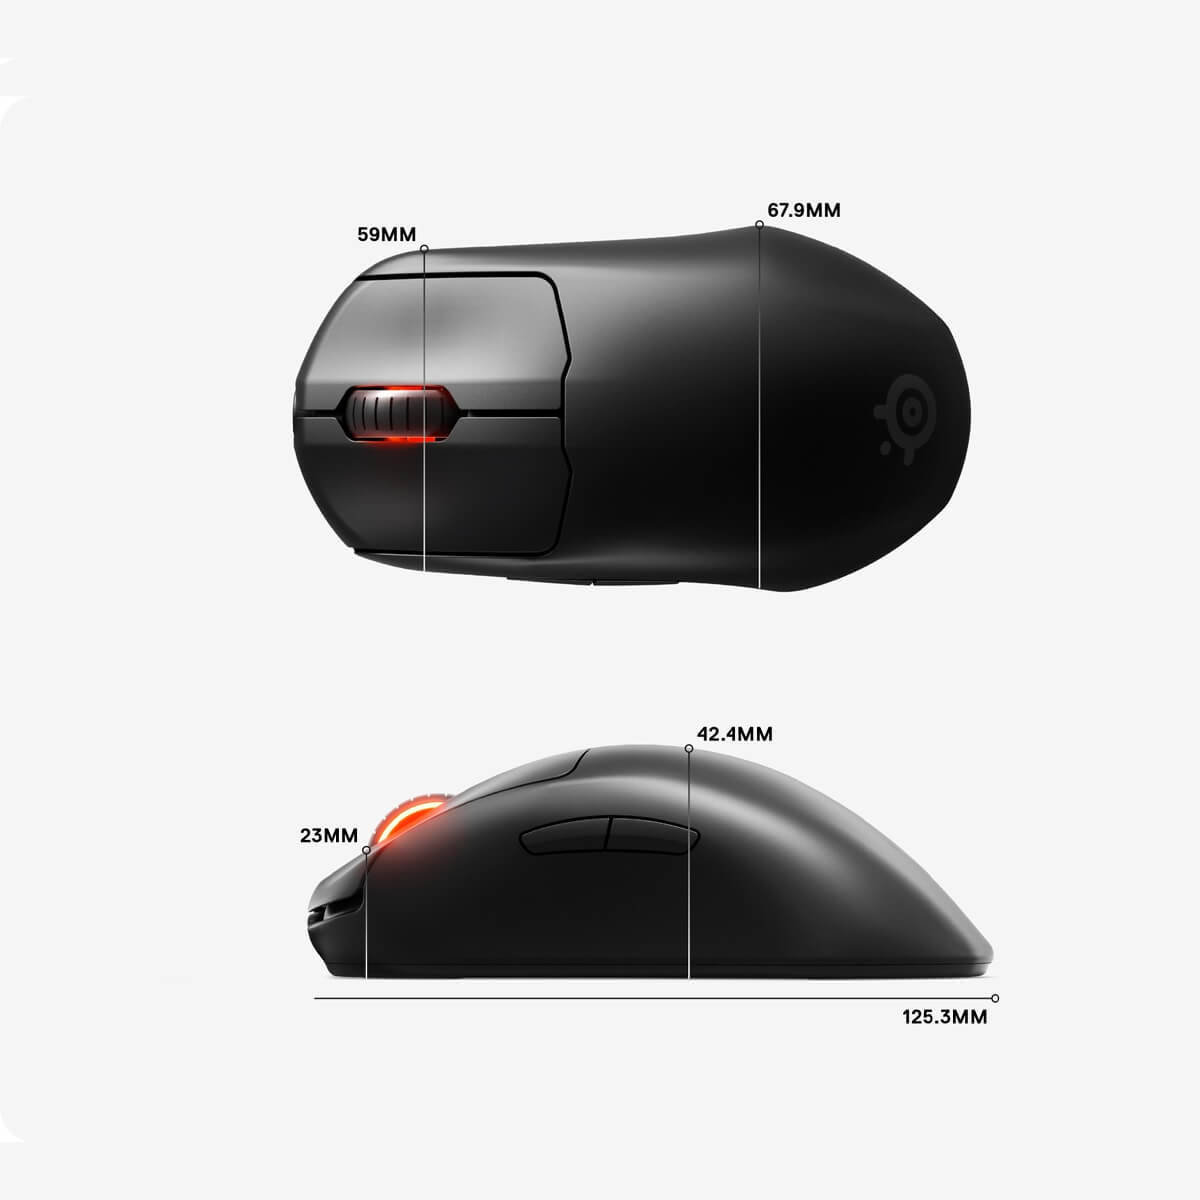 STEELSERIES Prime Wireless Pro Series Gaming Mouse - Mr.IT Computer